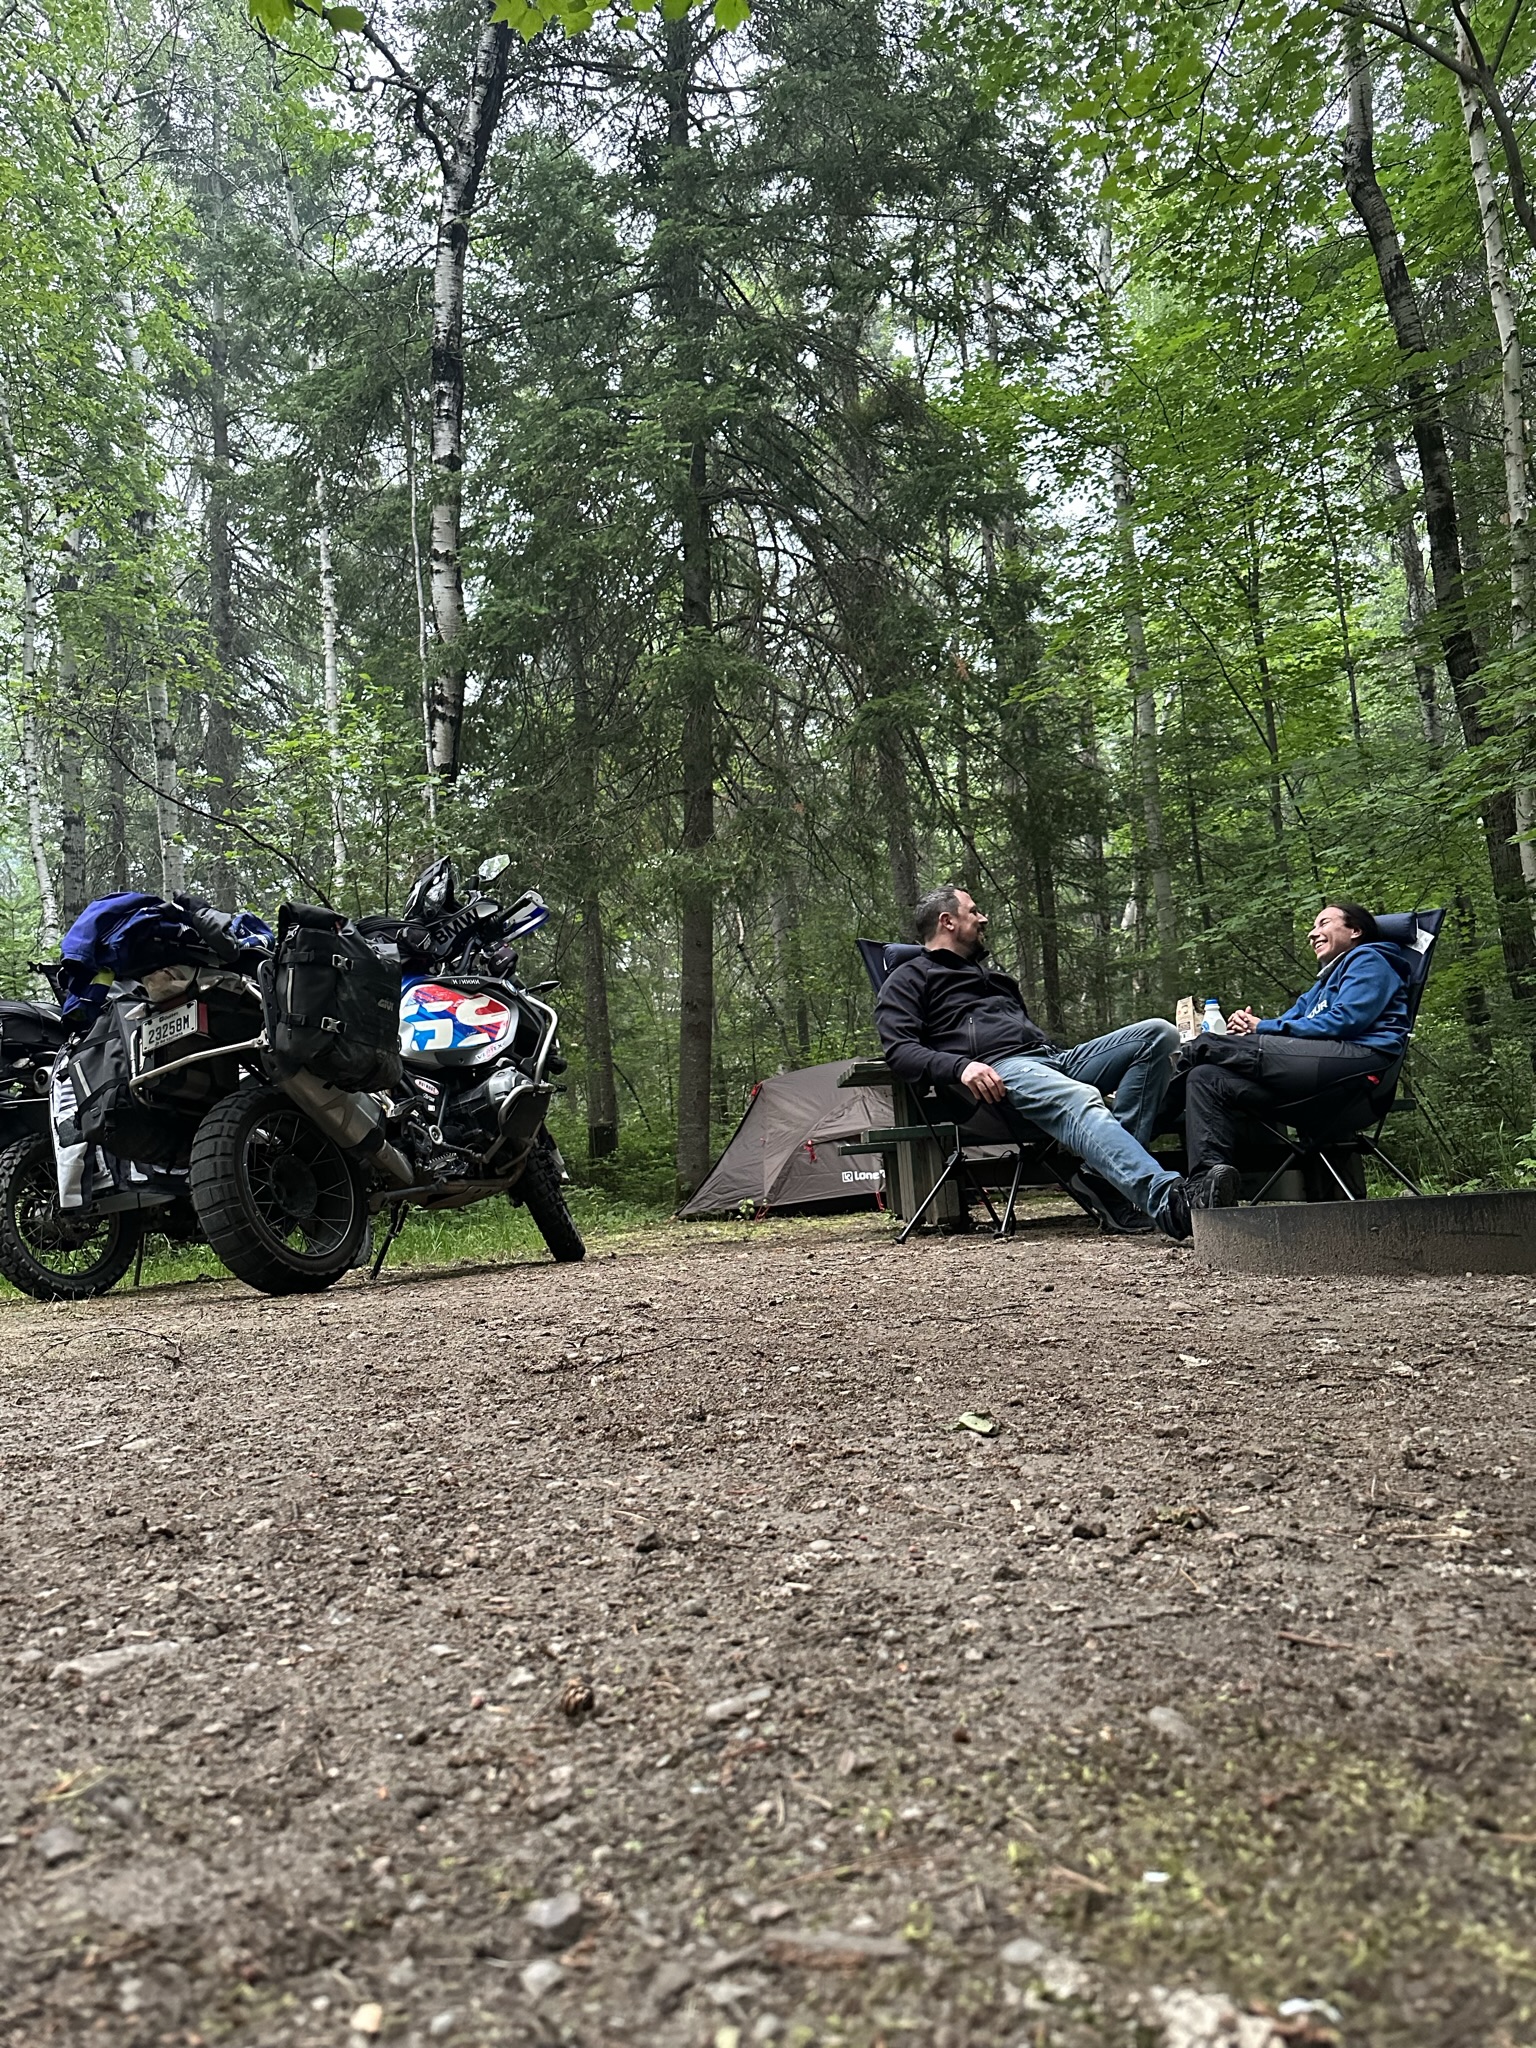 Camping with adventure motorcycle